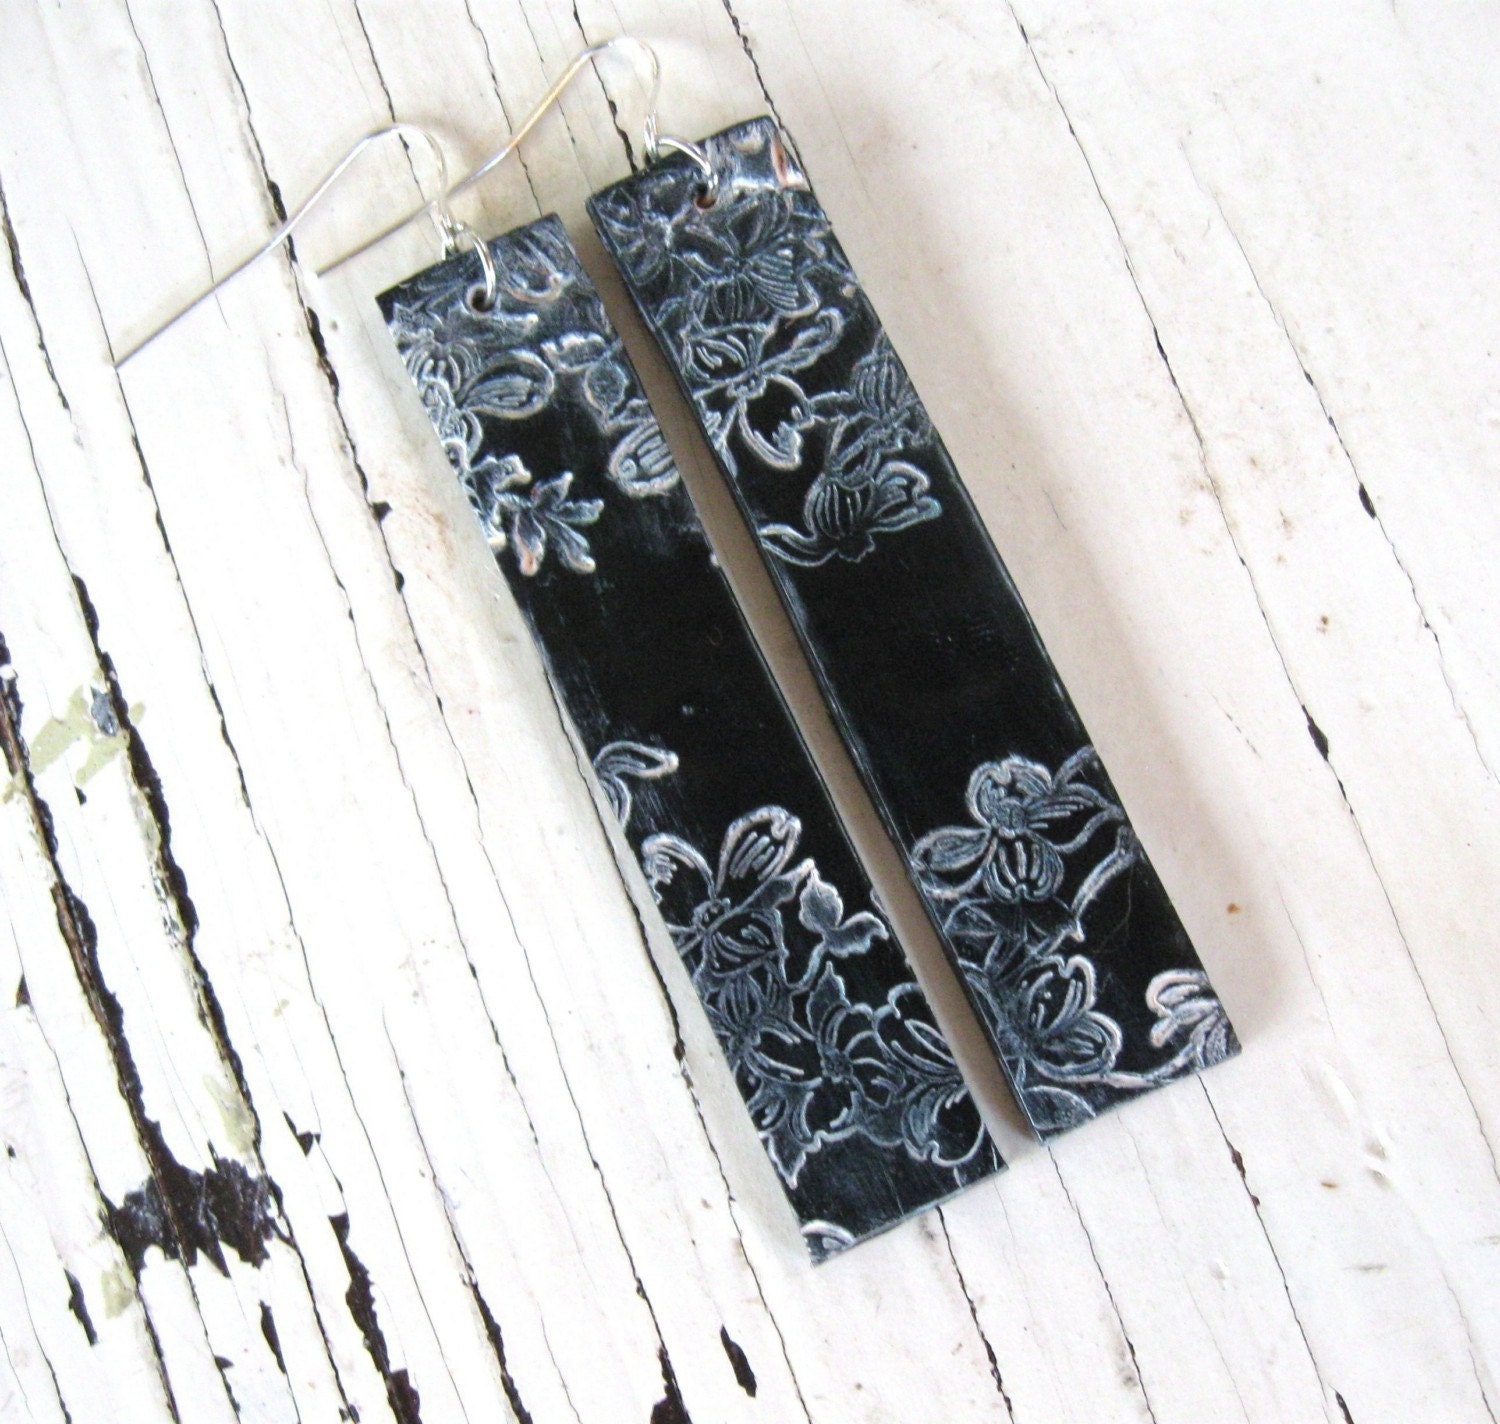 Long black earrings Asian floral design, handmade jewelry by theshagbag on Etsy